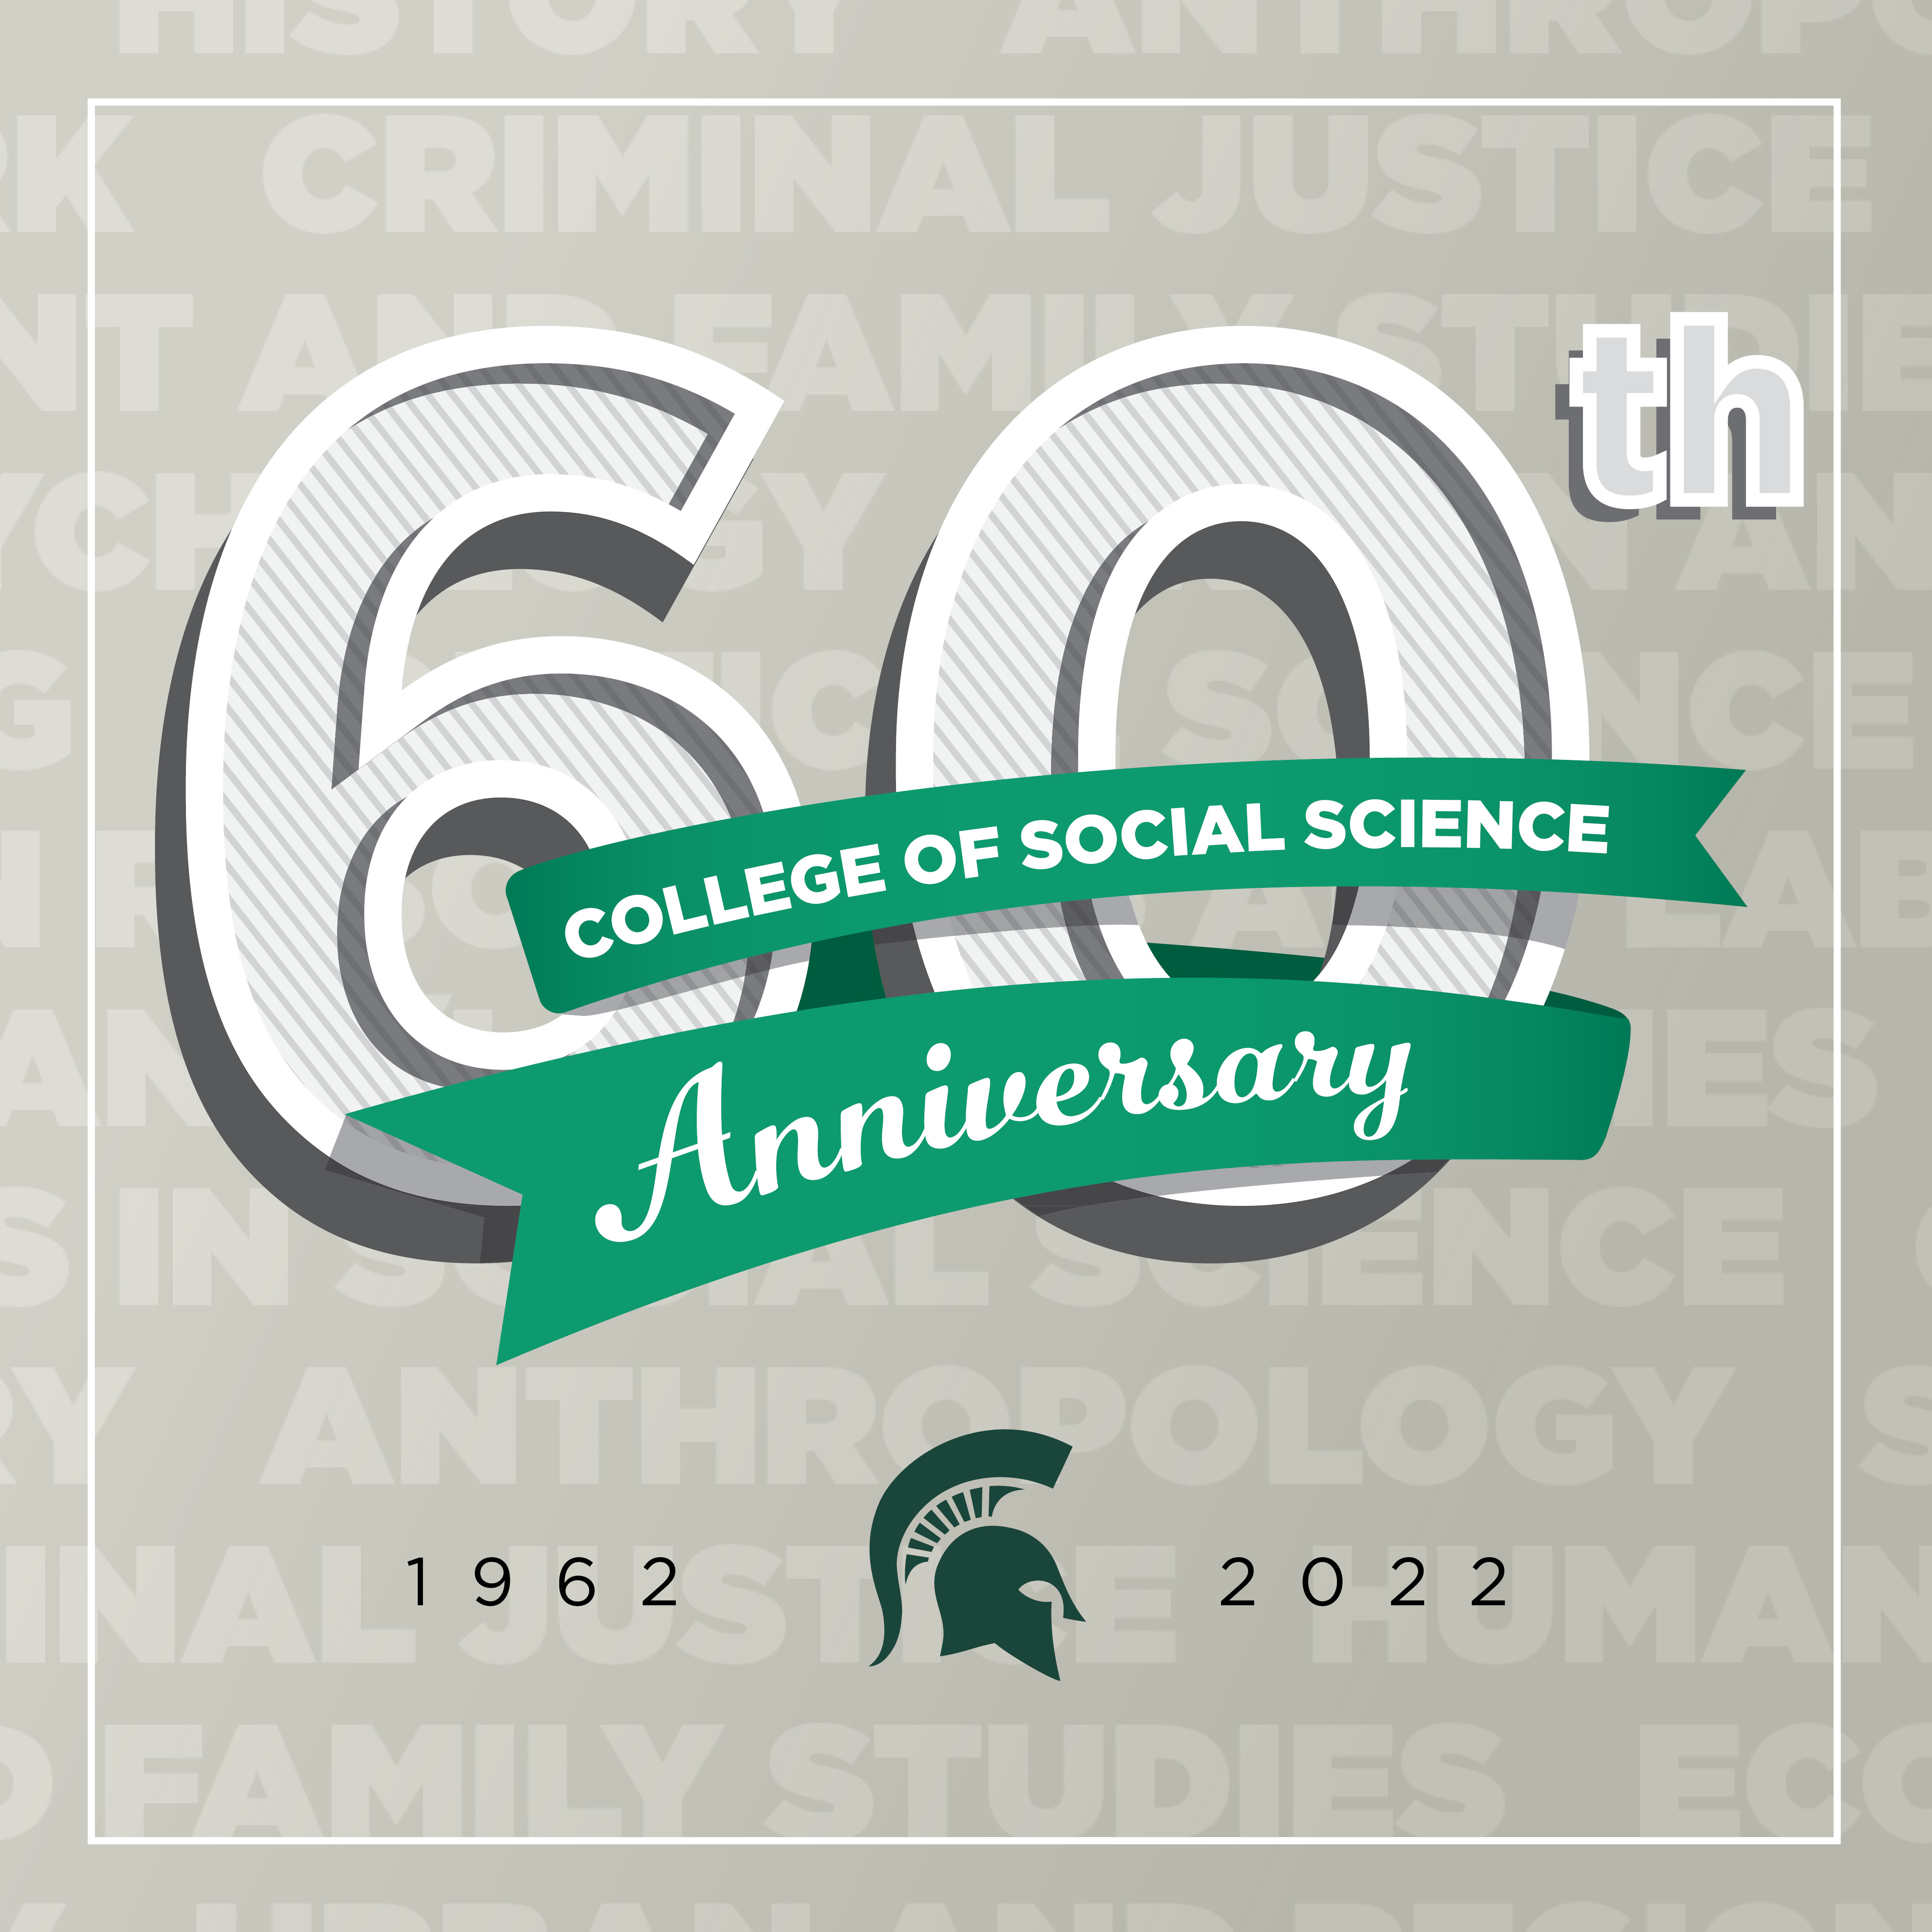 College of Social Science: Celebrating 60 Years!